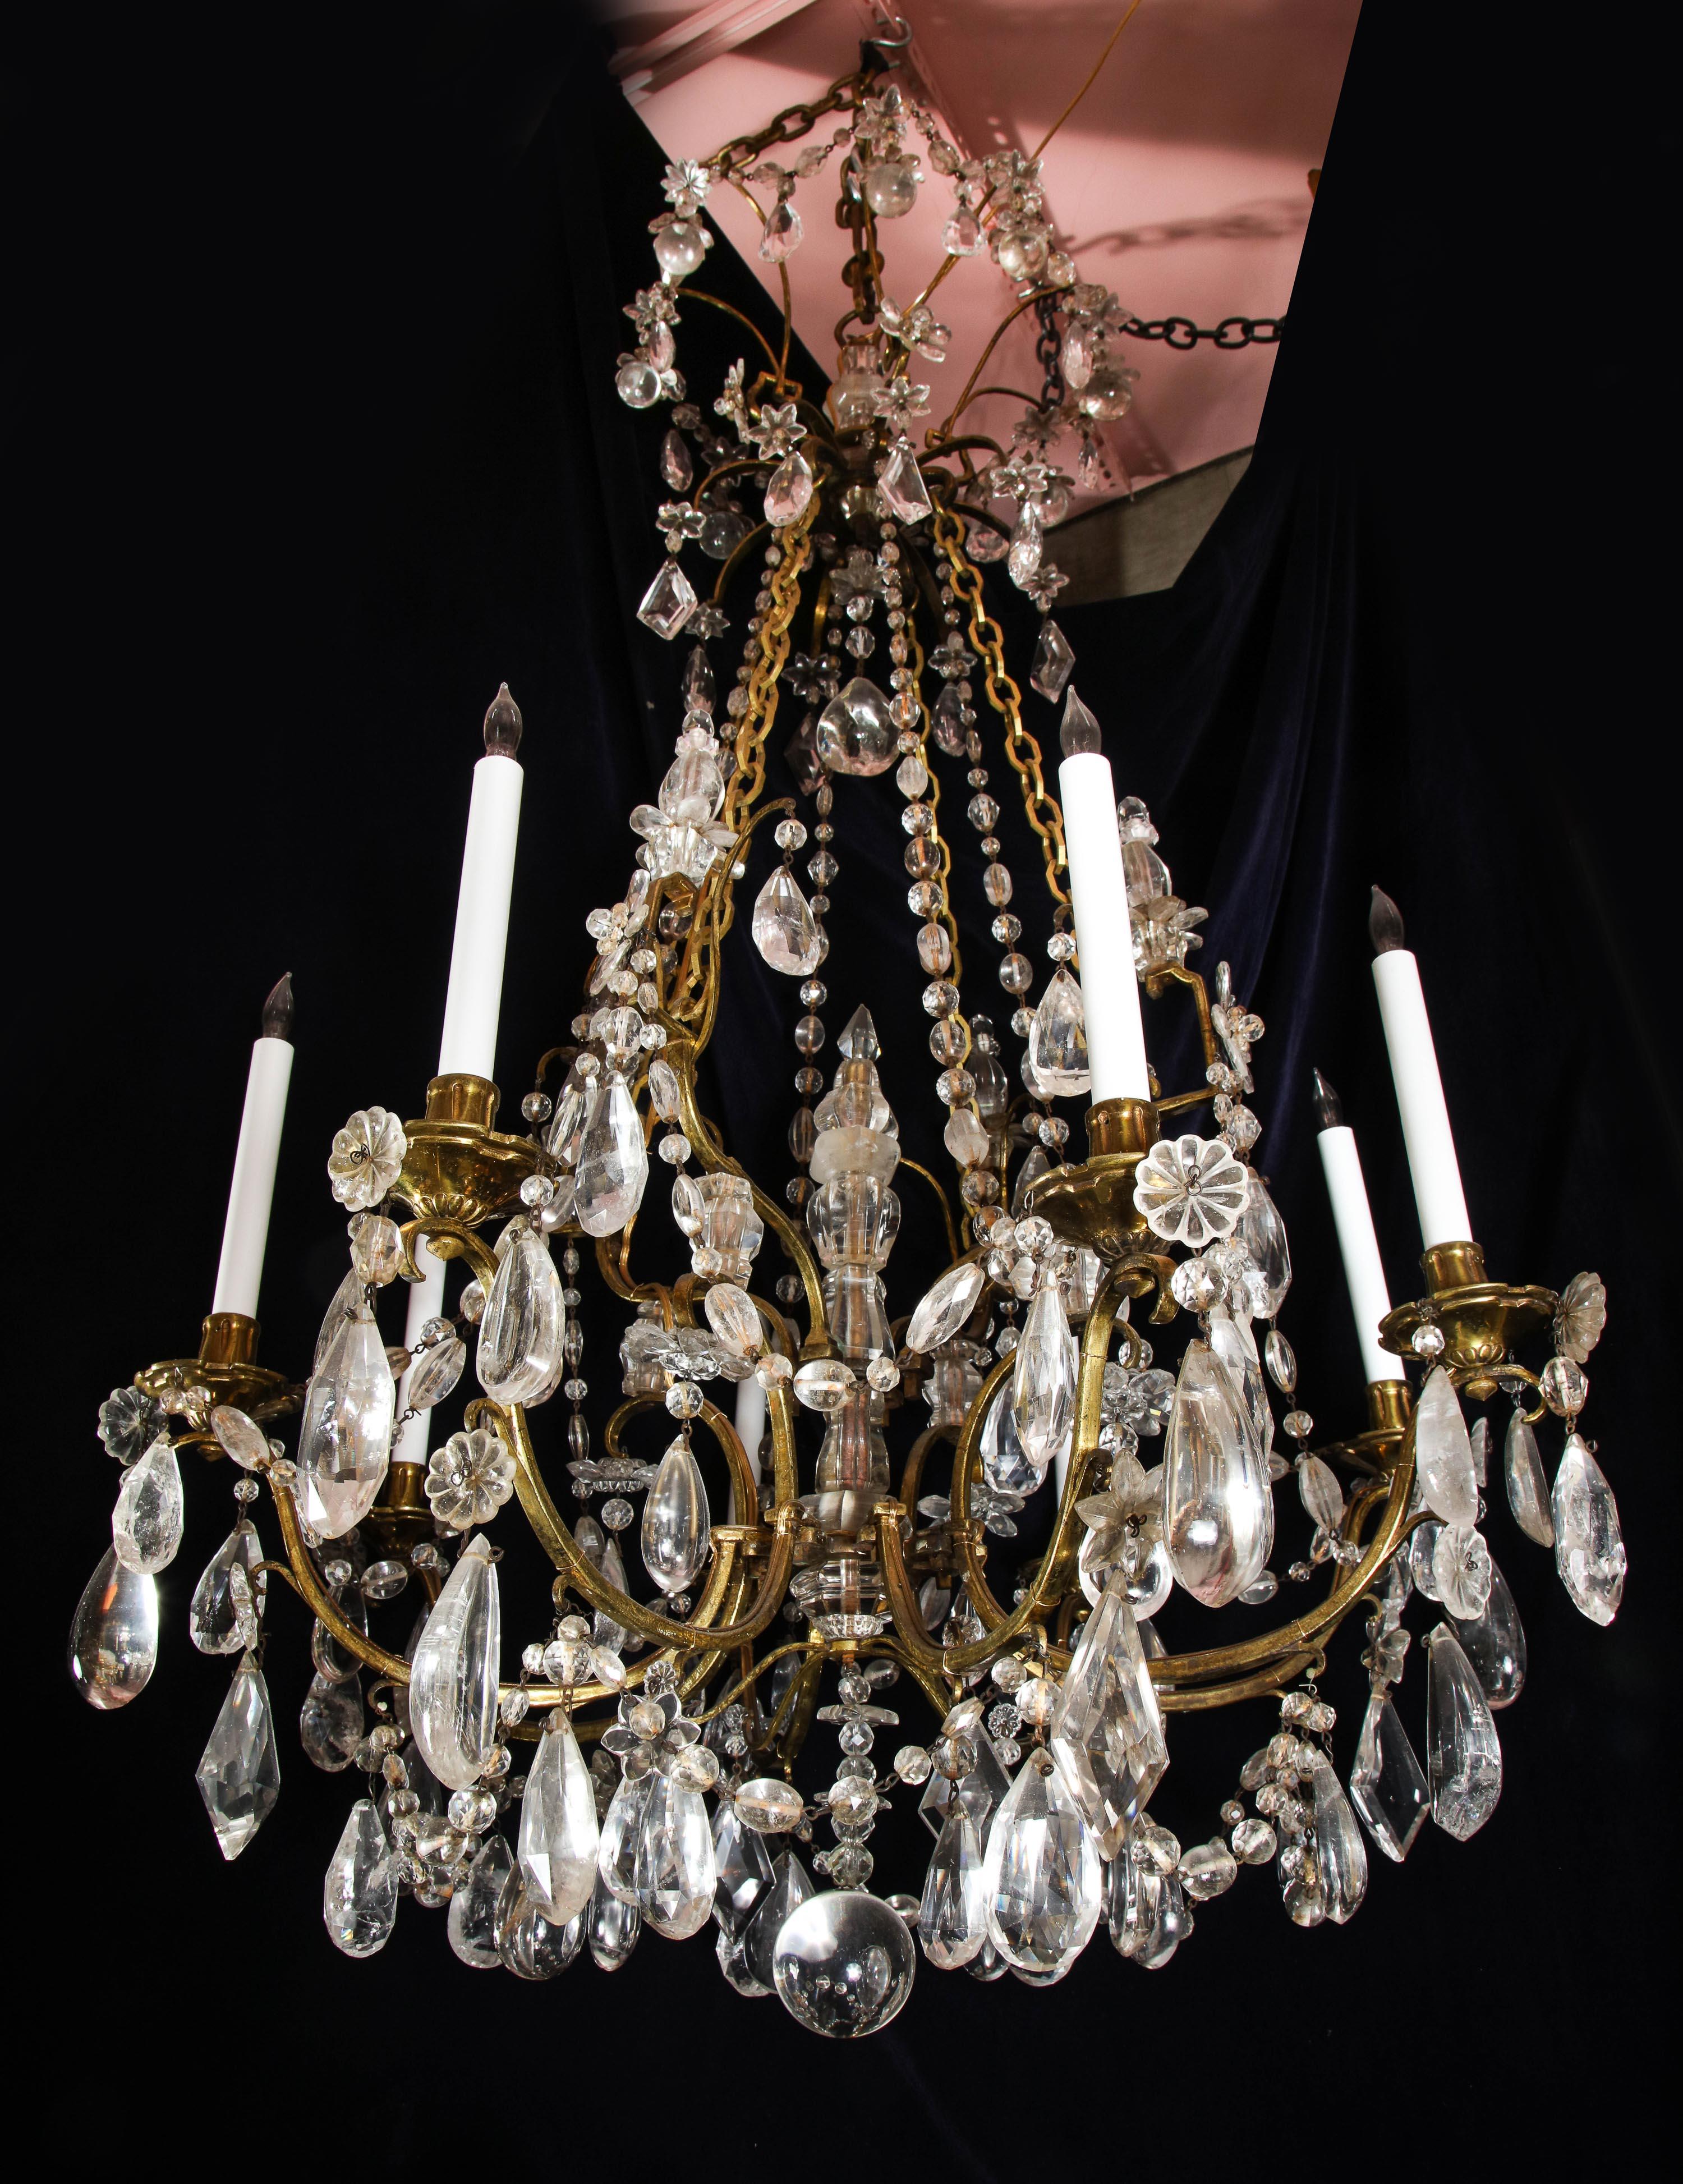 A large French Louis XVI gilt bronze and cut rock crystal multi light chandelier of superb quality embellished with cut rock crystal prisms, flowers, vases, chains and further adorned with a central cut rock crystal obelisk.